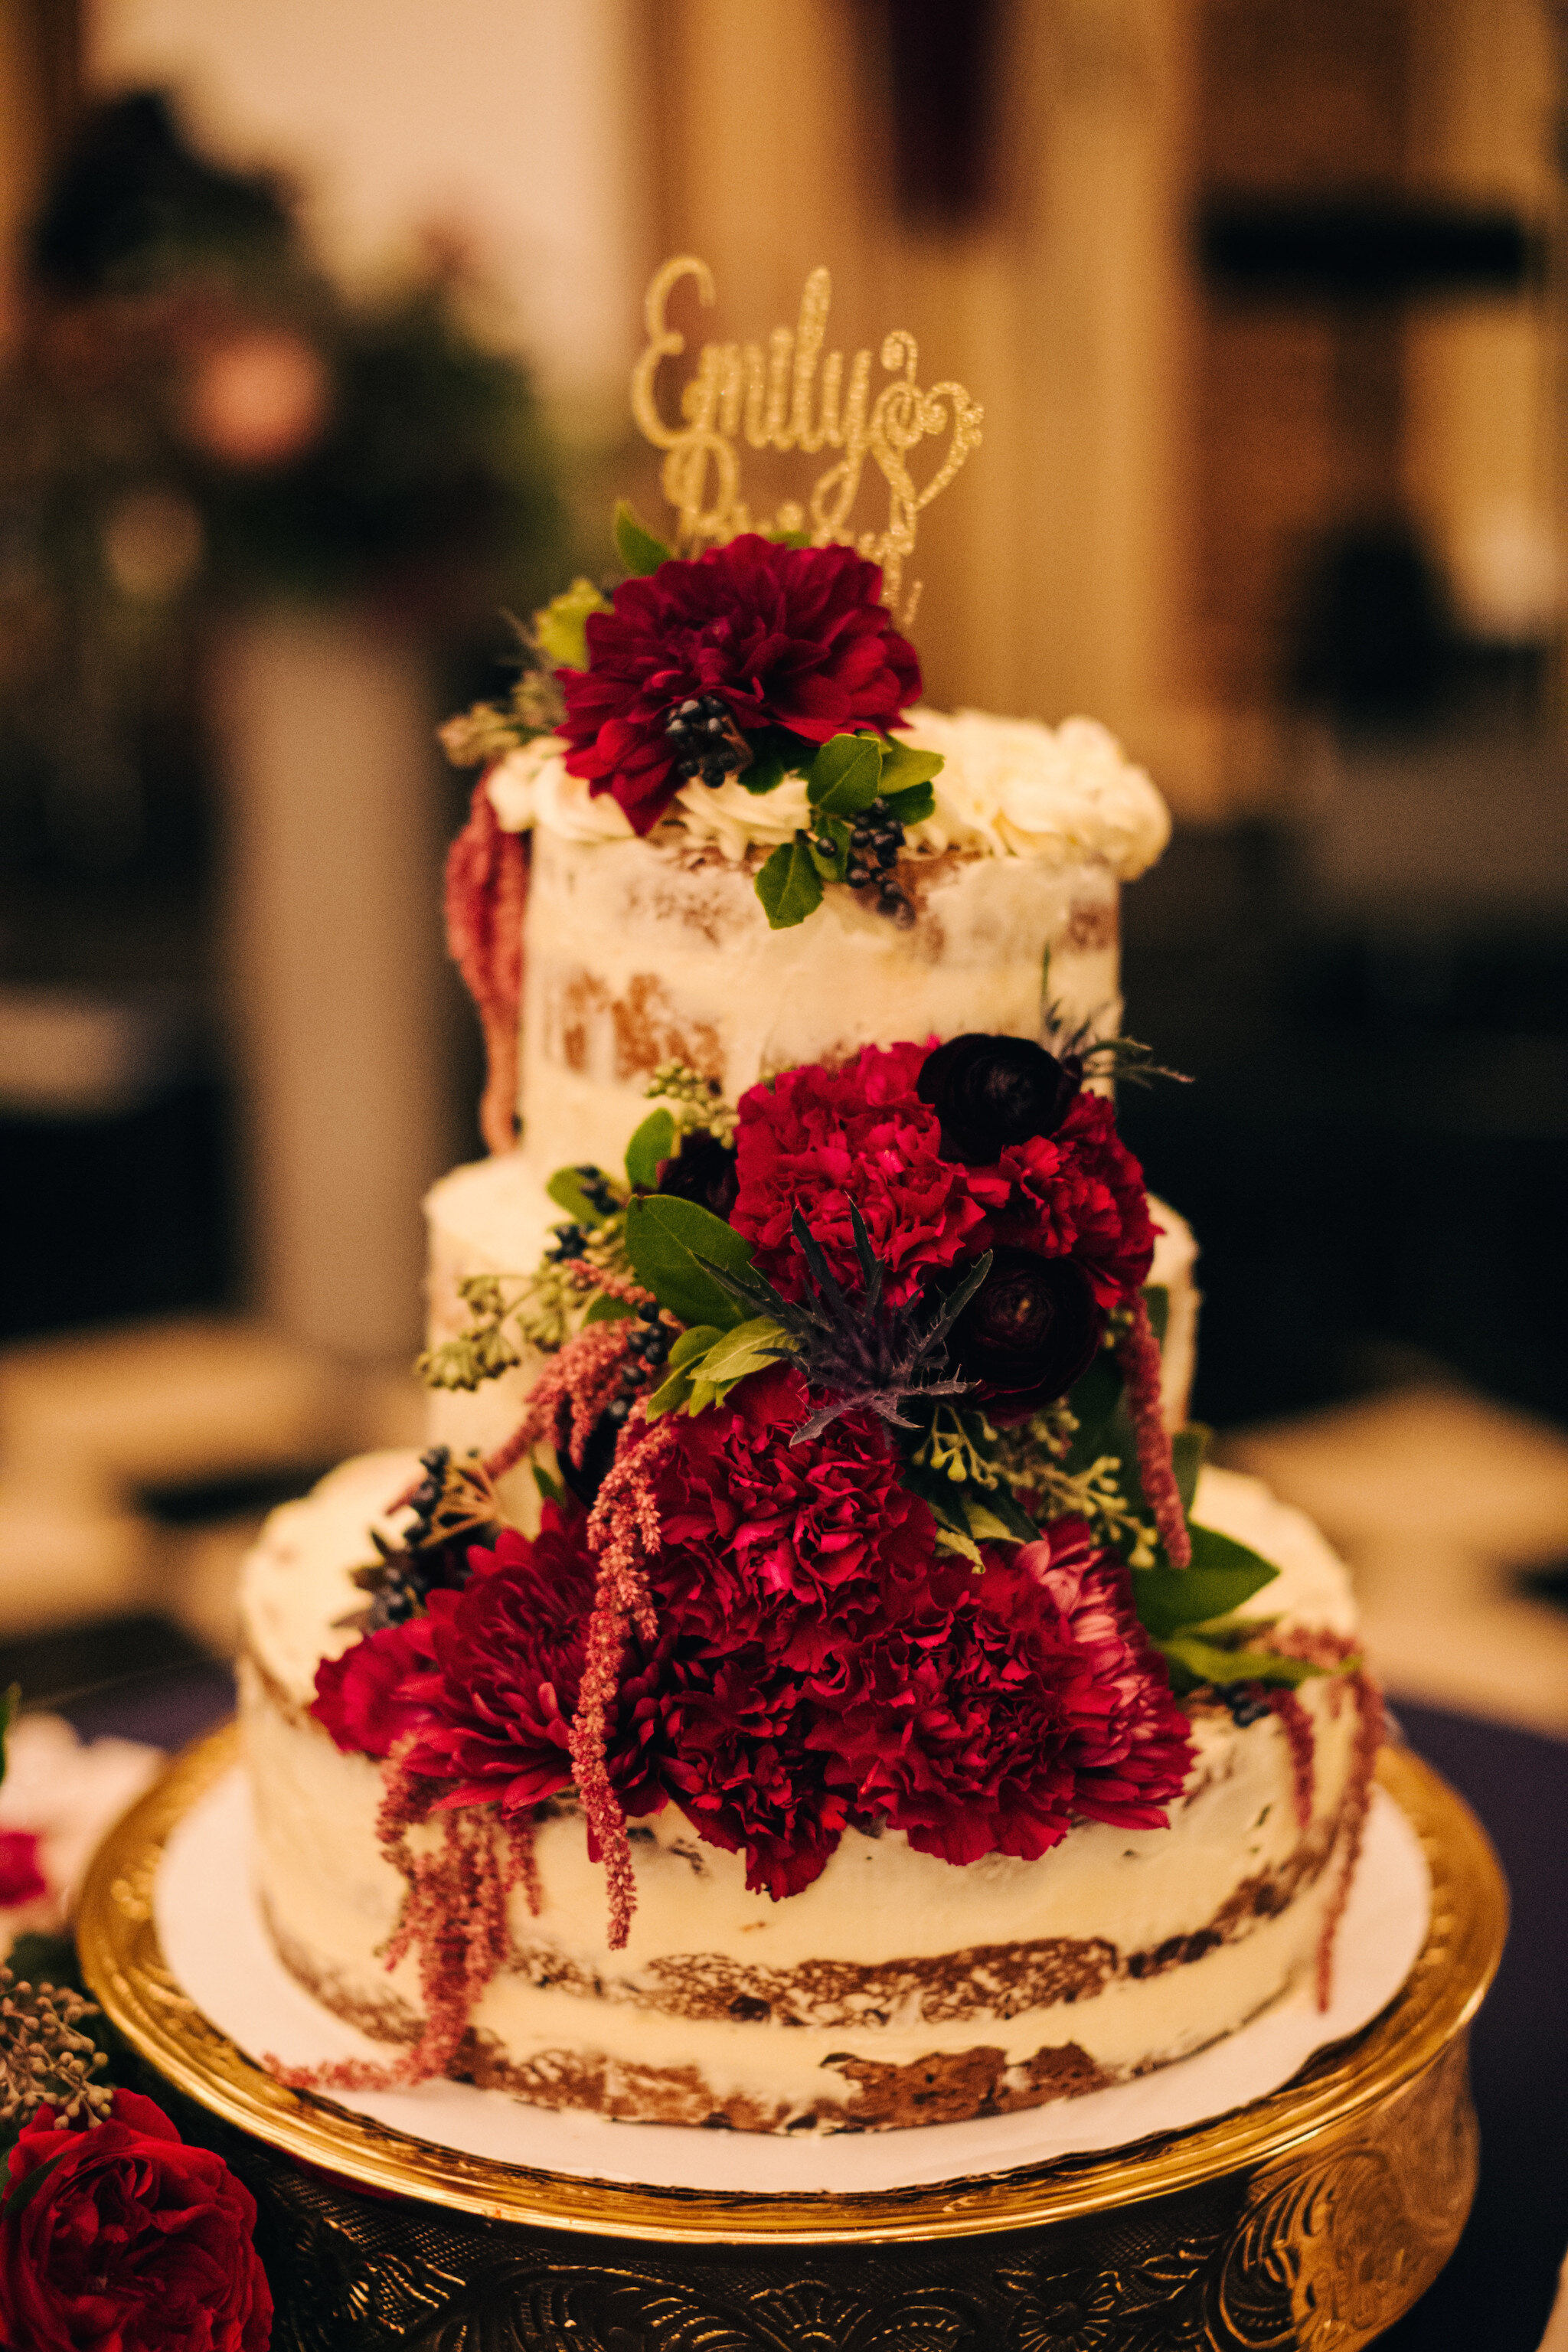 Elegant Jewel-Toned Wedding captured by Dorey Kronick featured on CHI thee WED